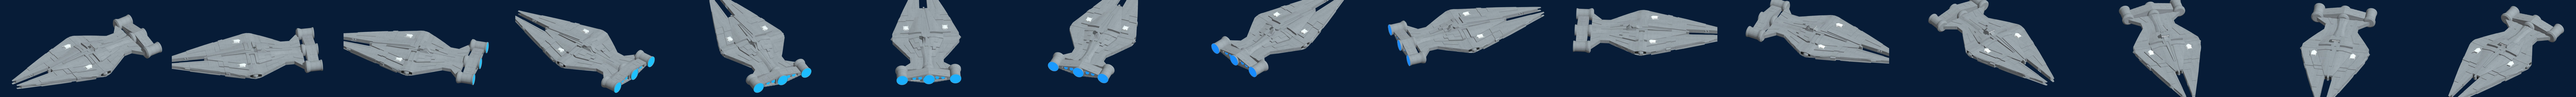 Arquitens Class Light Cruiser Download Free 3d Model By Kuat Entralla 3d Engineering Kuatentralla3d 6b3a978